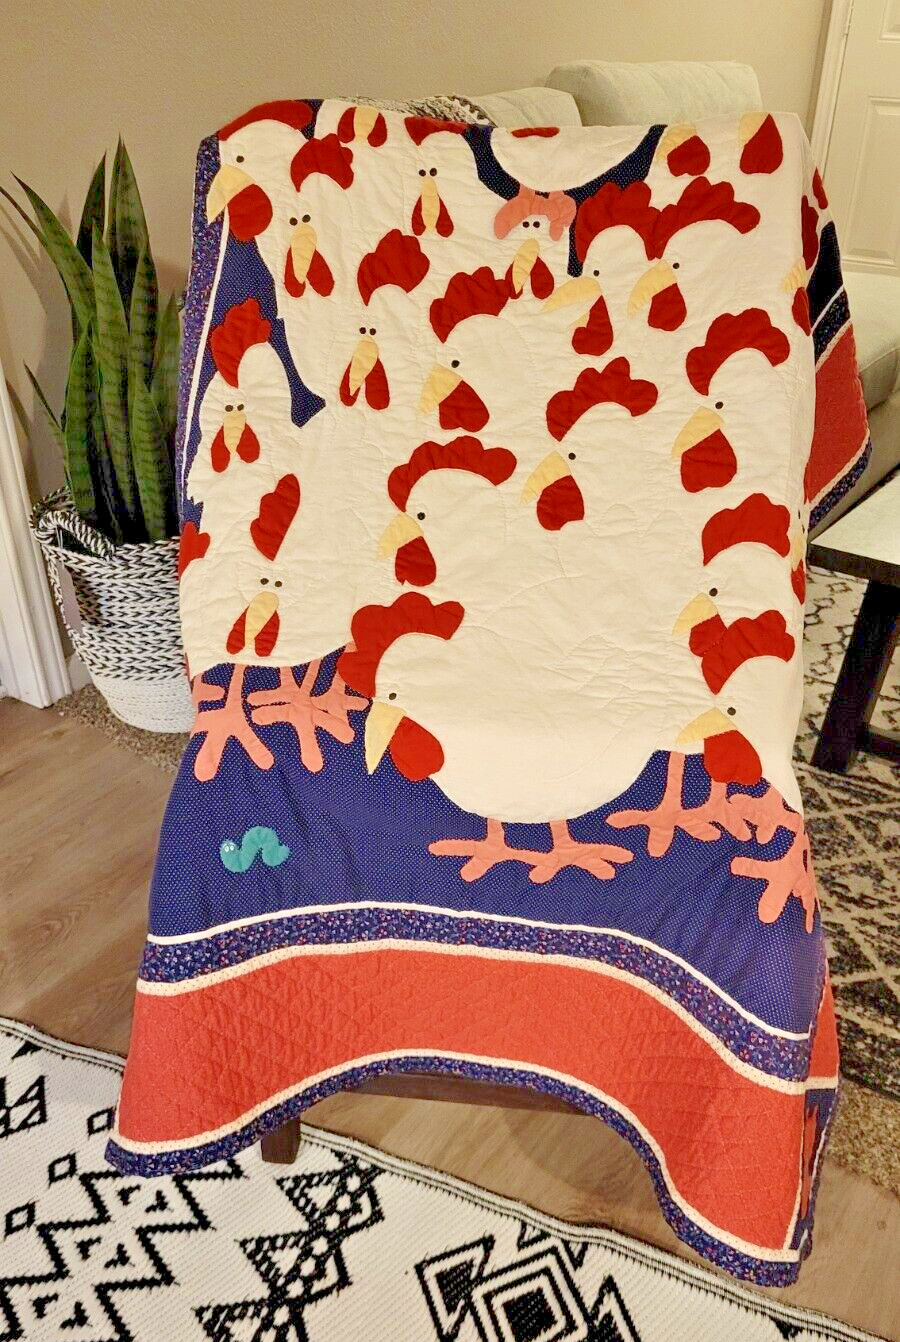 Vintage EARLY BIRD GETS THE WORM Quilt Apx 44x54 Hand Quilted